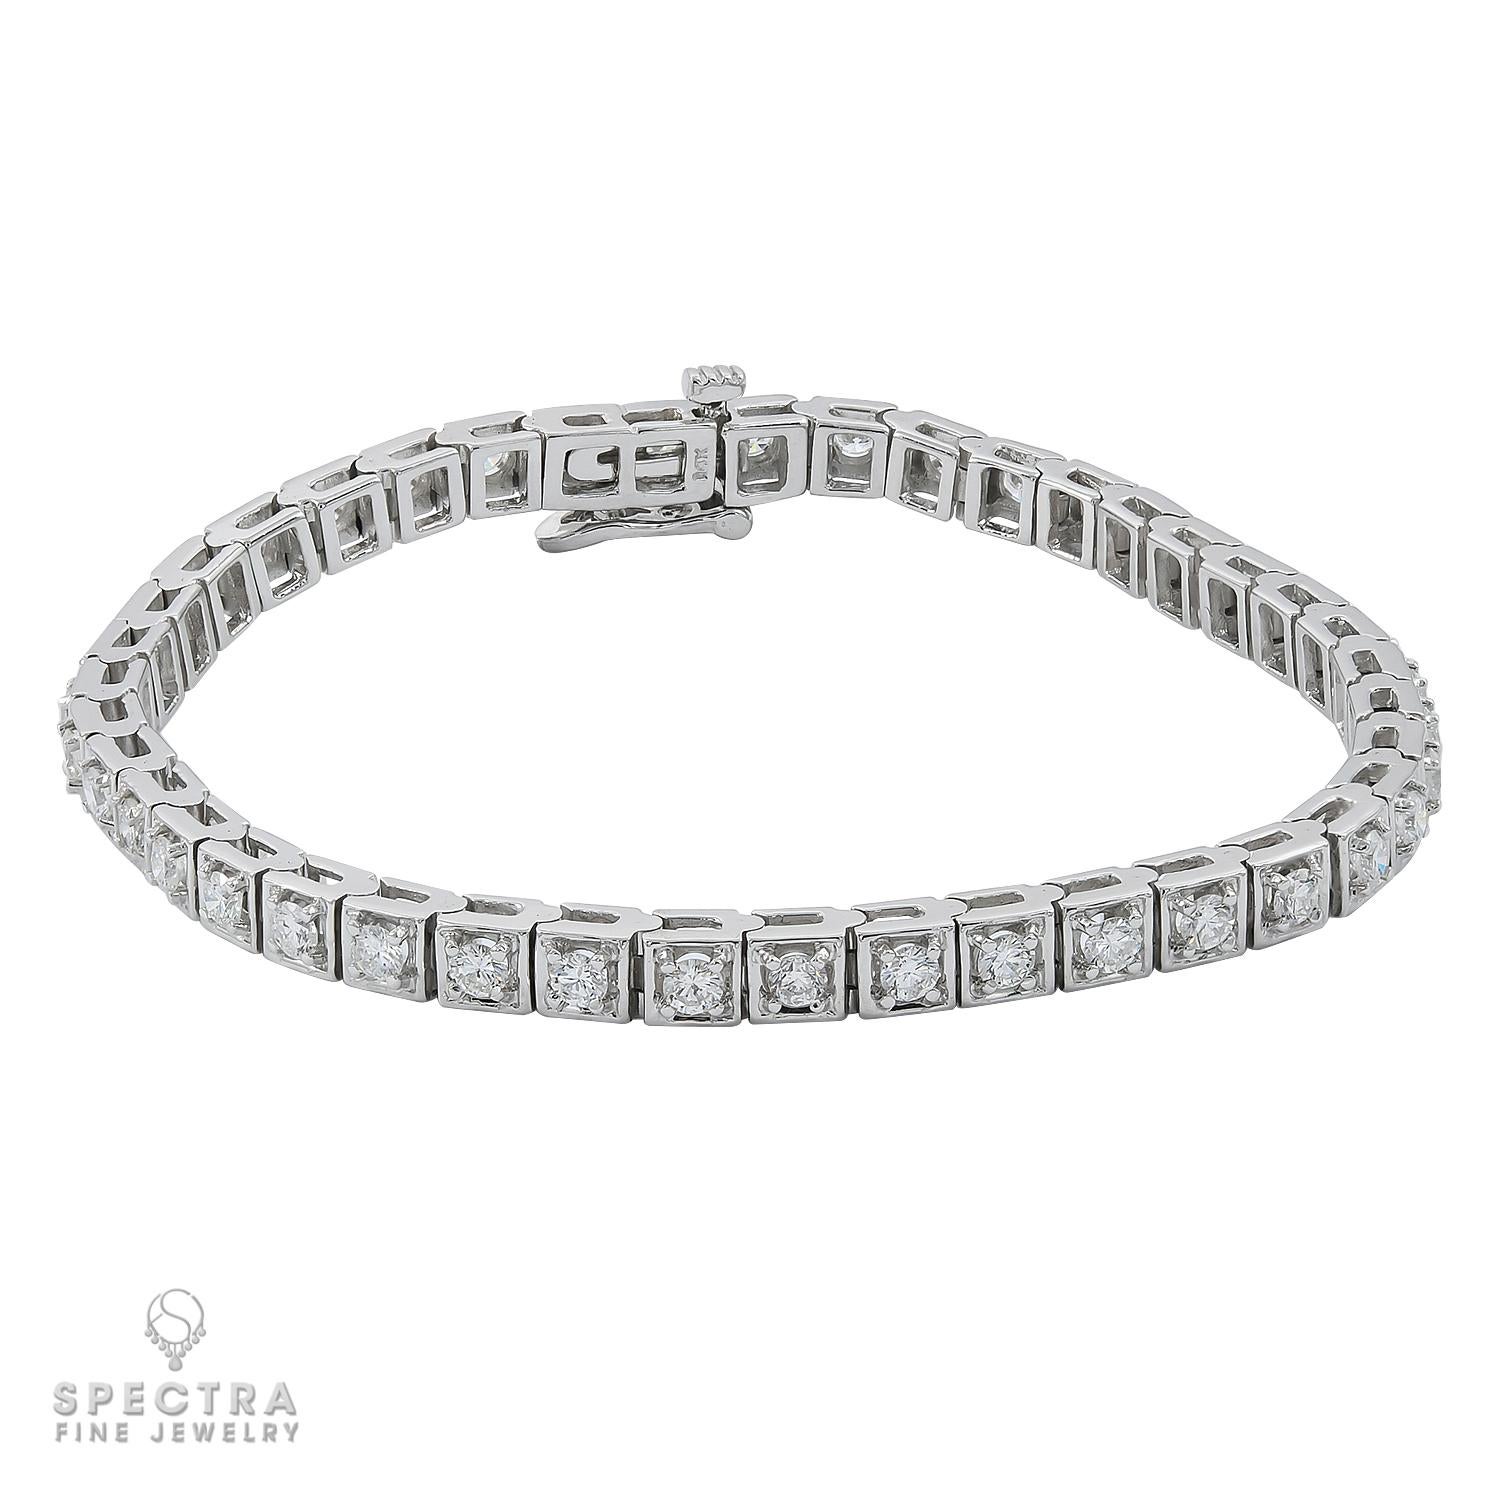 A tennis bracelet comprising of 41 diamonds weighing a total of 3.28 carats (0.08 carat each). 
The diamonds are natural, most with G-H color, VS-SI clarity.
The bracelet is 7 inches long.
Metal is 14k white gold; gross weight 16.61 gram.